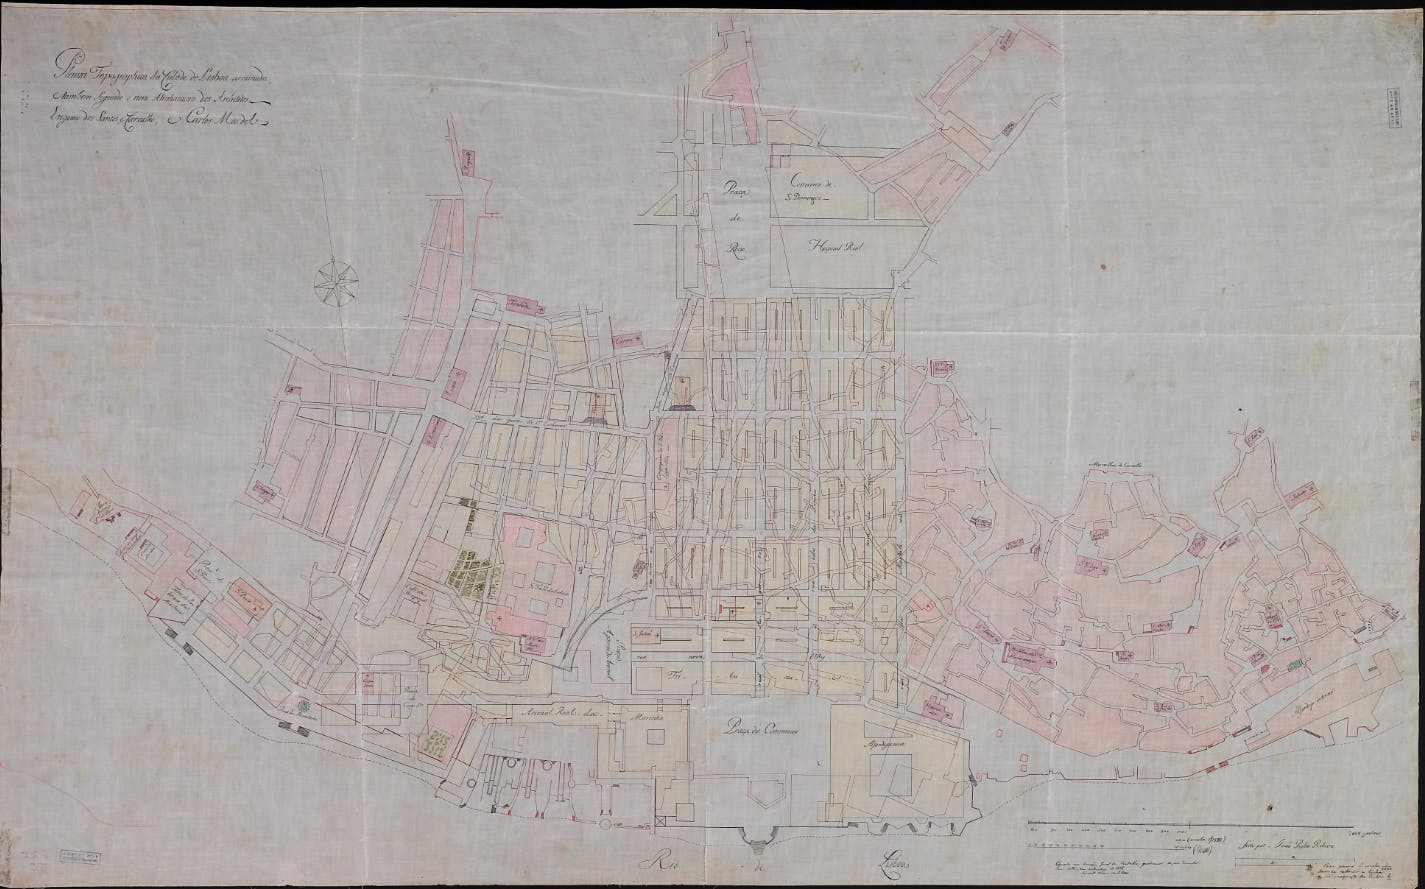 Copy of plan number 5 for the reconstruction of Lisbon. Here you can see the topographic plan of the City of Lisbon Ruined - in pink the design of the streets of Lisbon before the earthquake and in yellow, the new urban alignment, with the new layout of the streets and the new buildings - proposed by Captain Eugénio dos Santos (1711-1760). April 1756, Lisbon. MC.DES.0015, Colecção do Museu de Lisboa /Câmara Municipal de Lisboa – EGEAC